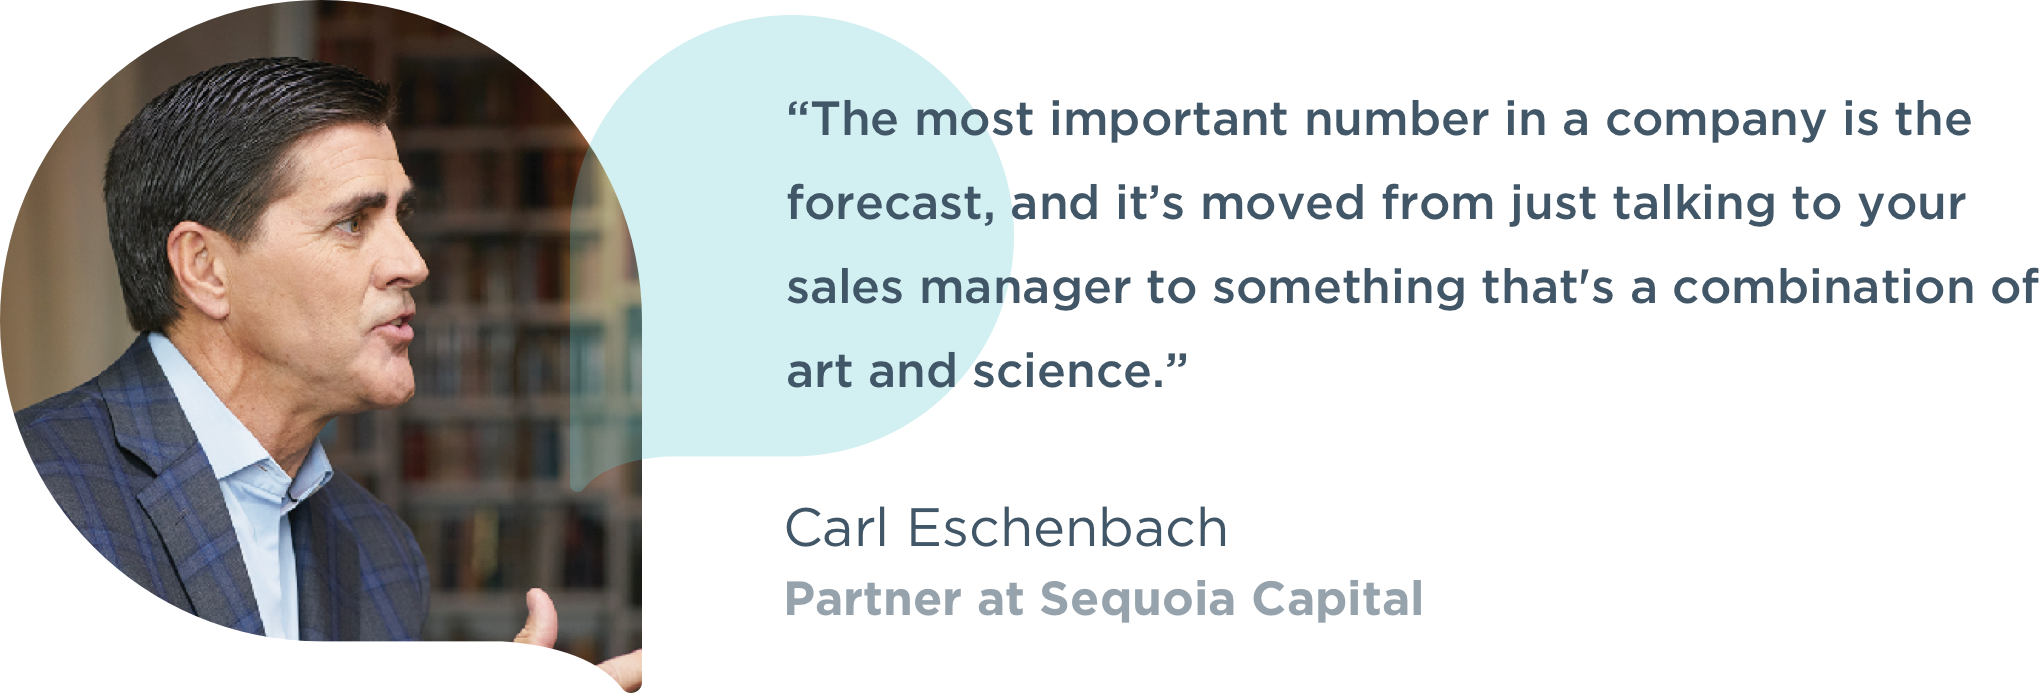 Image with quote and headshot photograph of Carl Eschenbach, Partner at Sequoia Capital